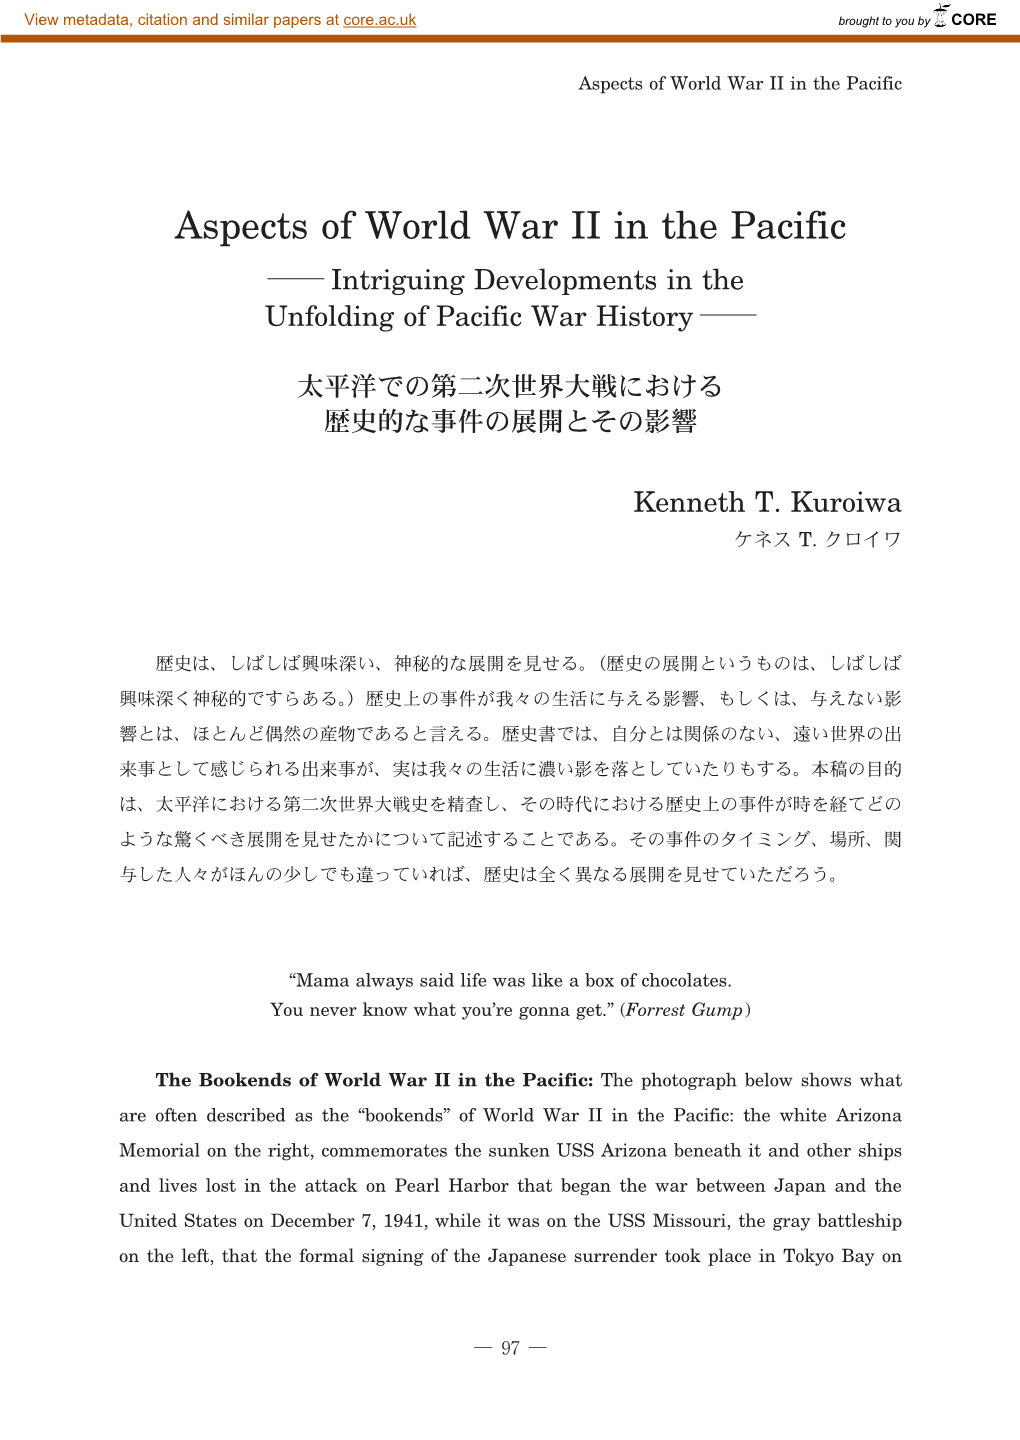 Aspects of World War II in the Pacific